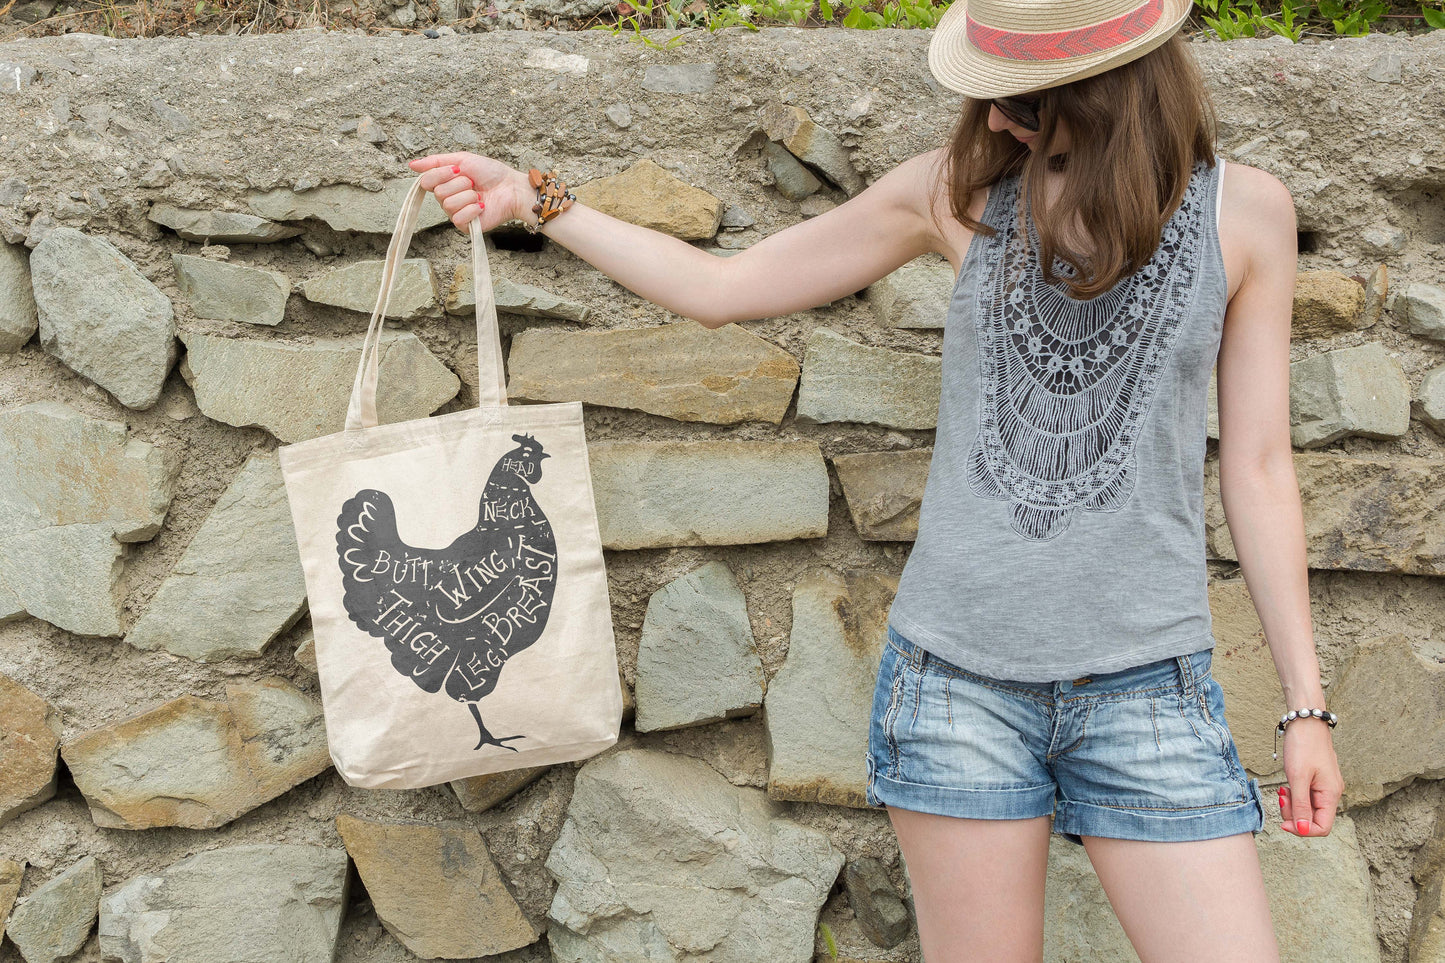 Cute Chicken Tote 100% Cotton Fun Grocery Tote, Book Tote. Premium Cotton Canvas 15.5" by 19.5 " with 5" Gusset, Cuts of Meat Butcher Chart